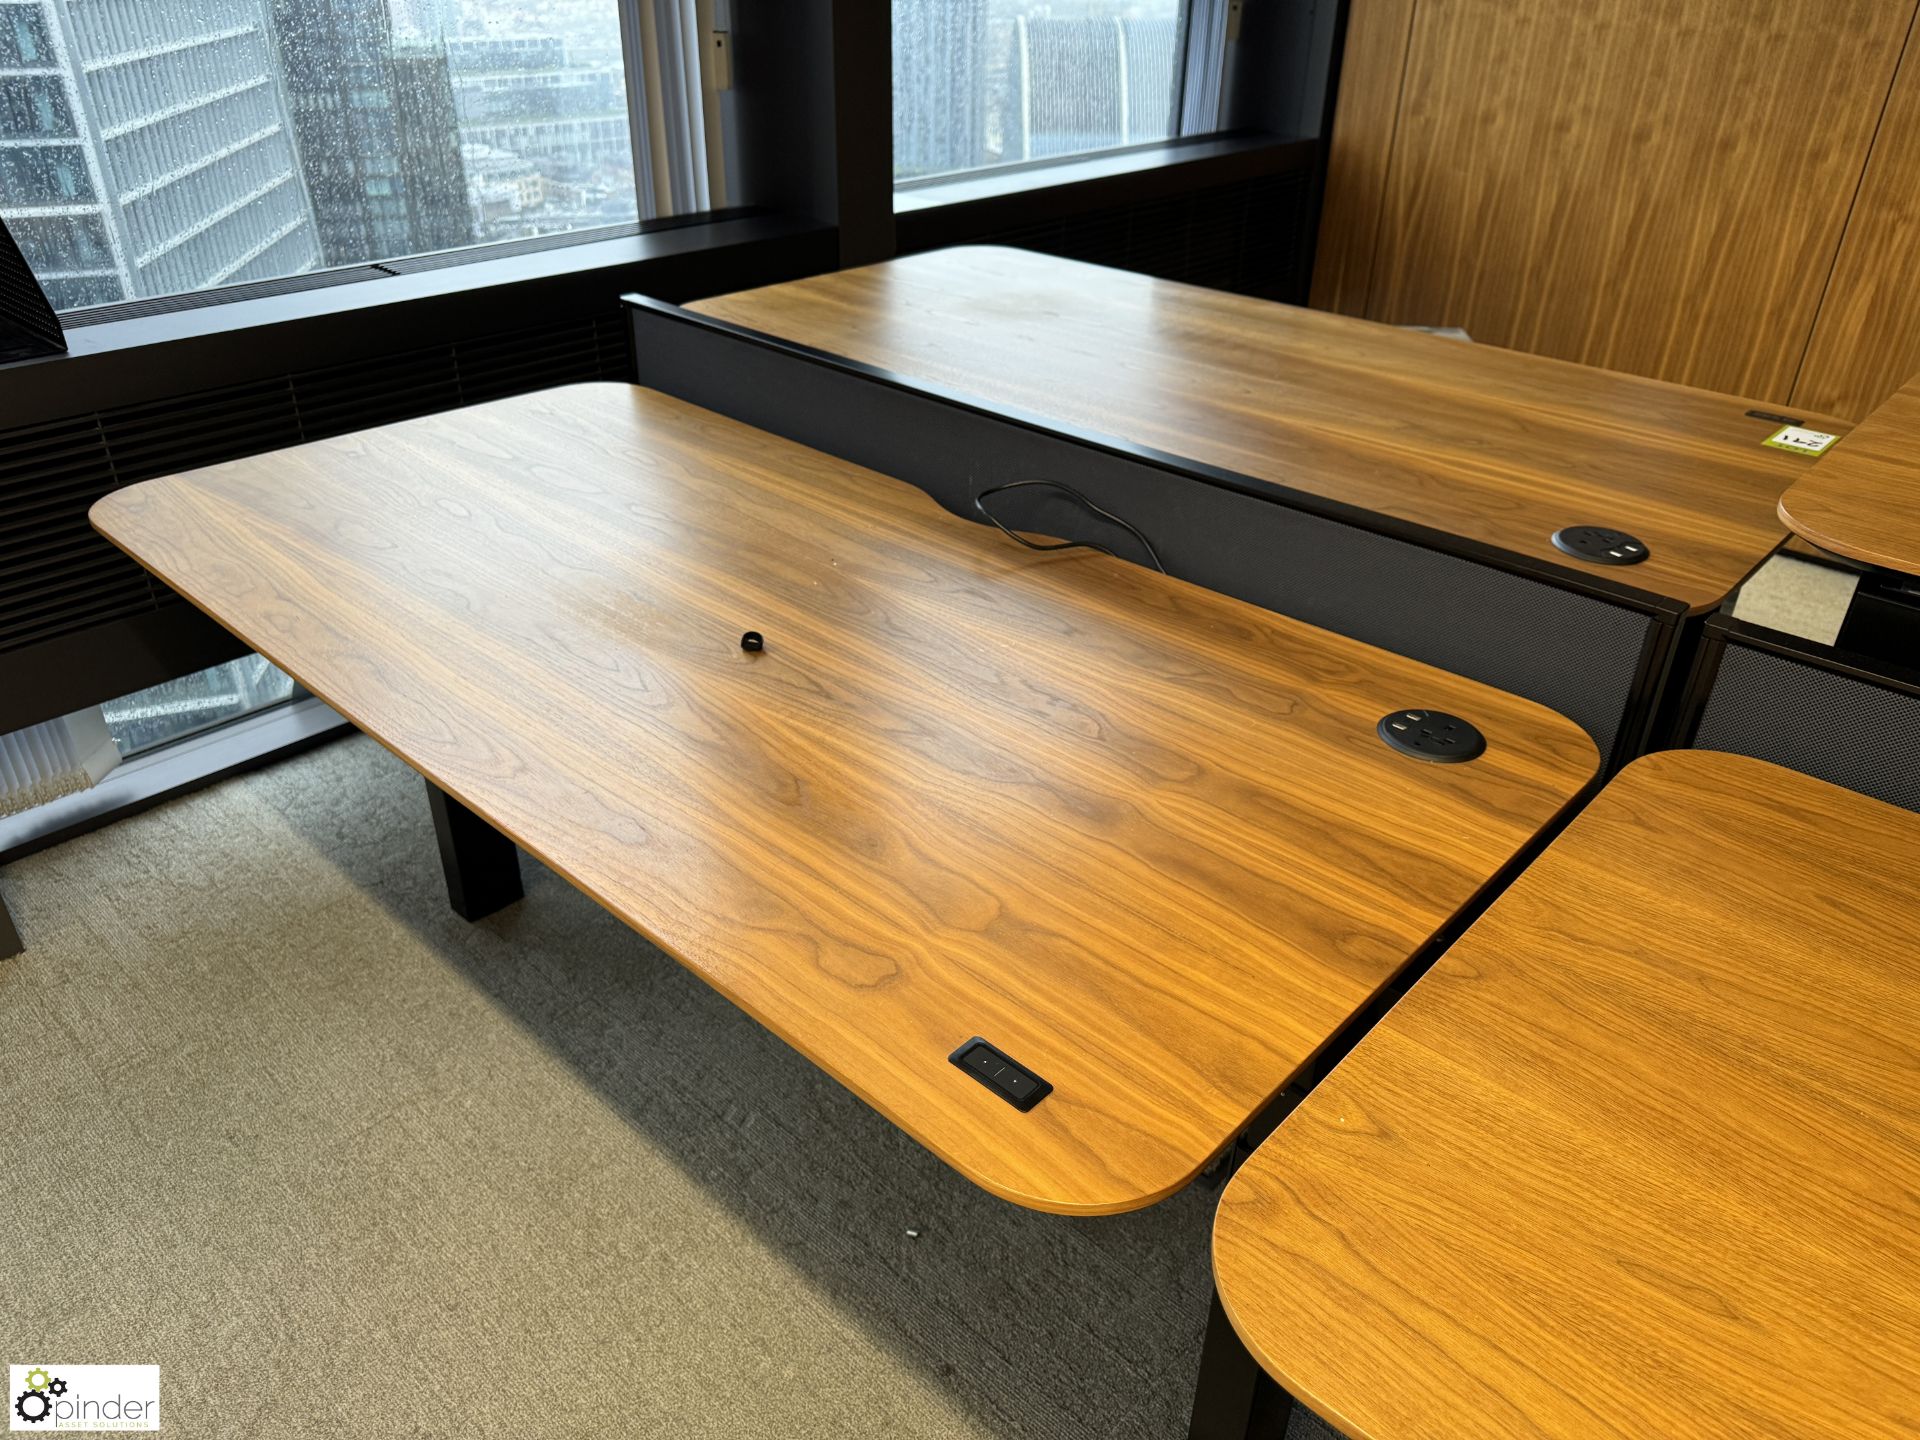 OMT back to back powered rise and fall Desks, 1600mm x 800mm per desk leaf, cherry veneer,with - Image 4 of 5